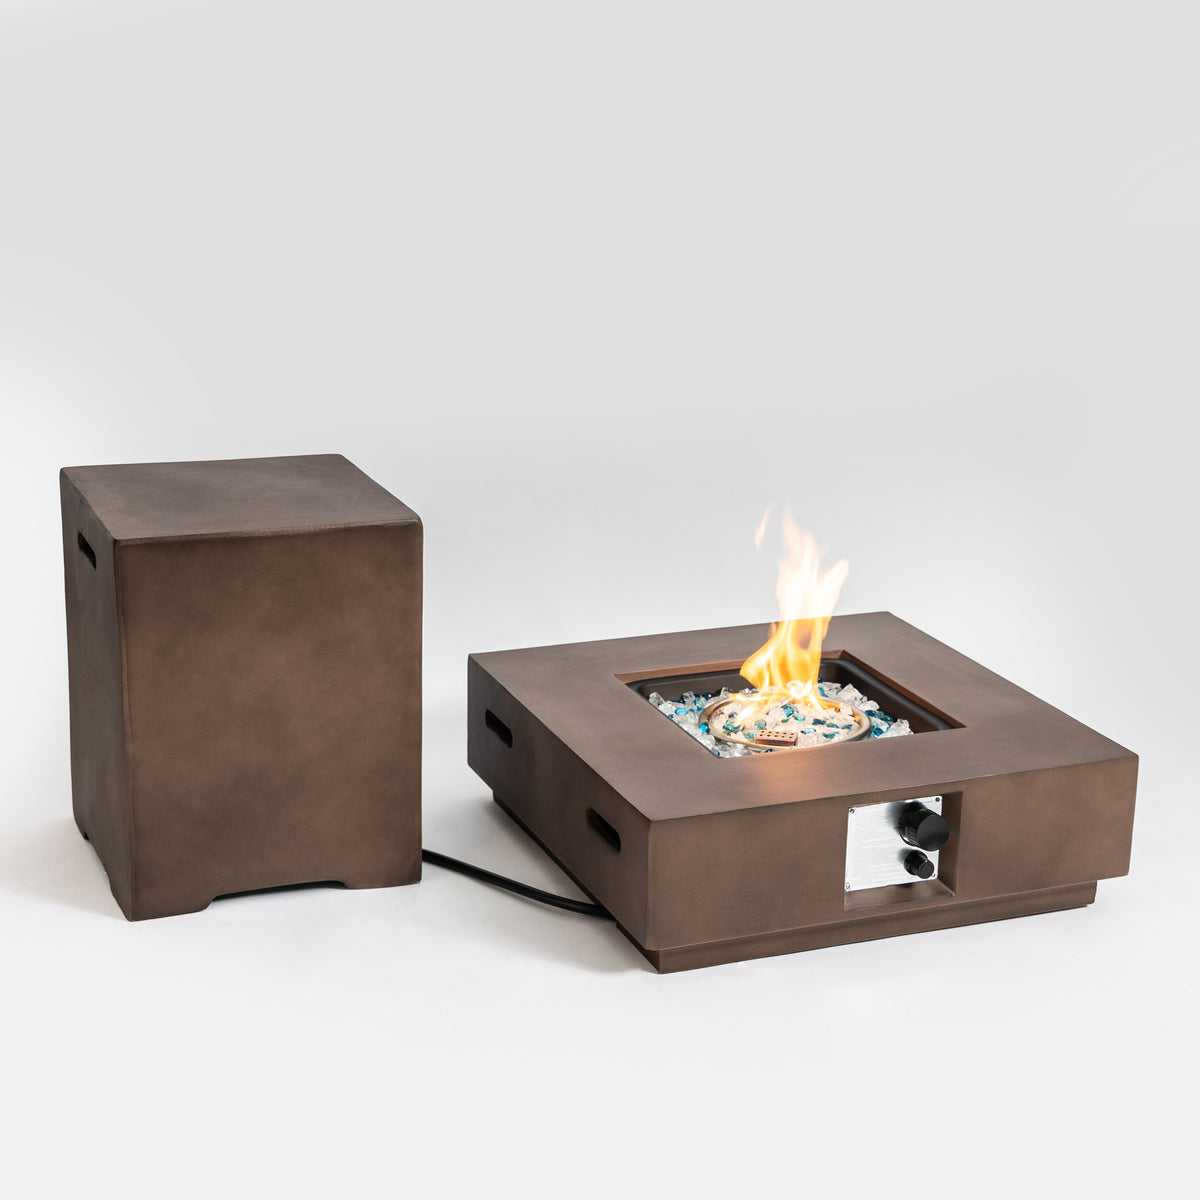 Outdoor Concrete Fire Pit Table with Propane Tank Cover, Brown